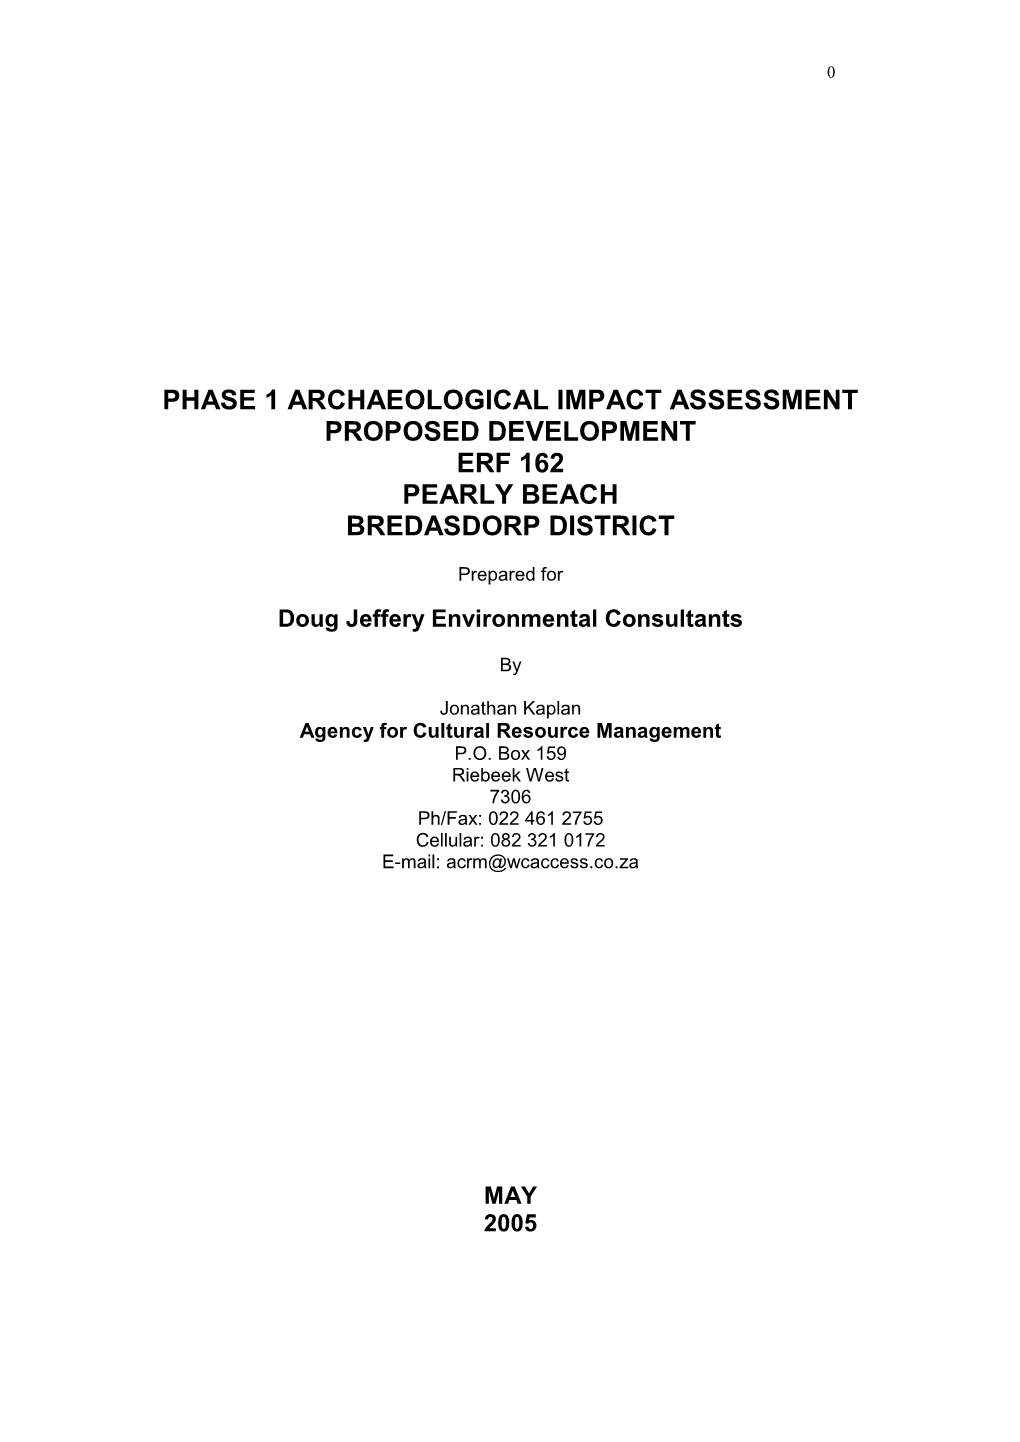 Phase 1 Archaeological Impact Assessment Proposed Development Erf 162 Pearly Beach Bredasdorp District